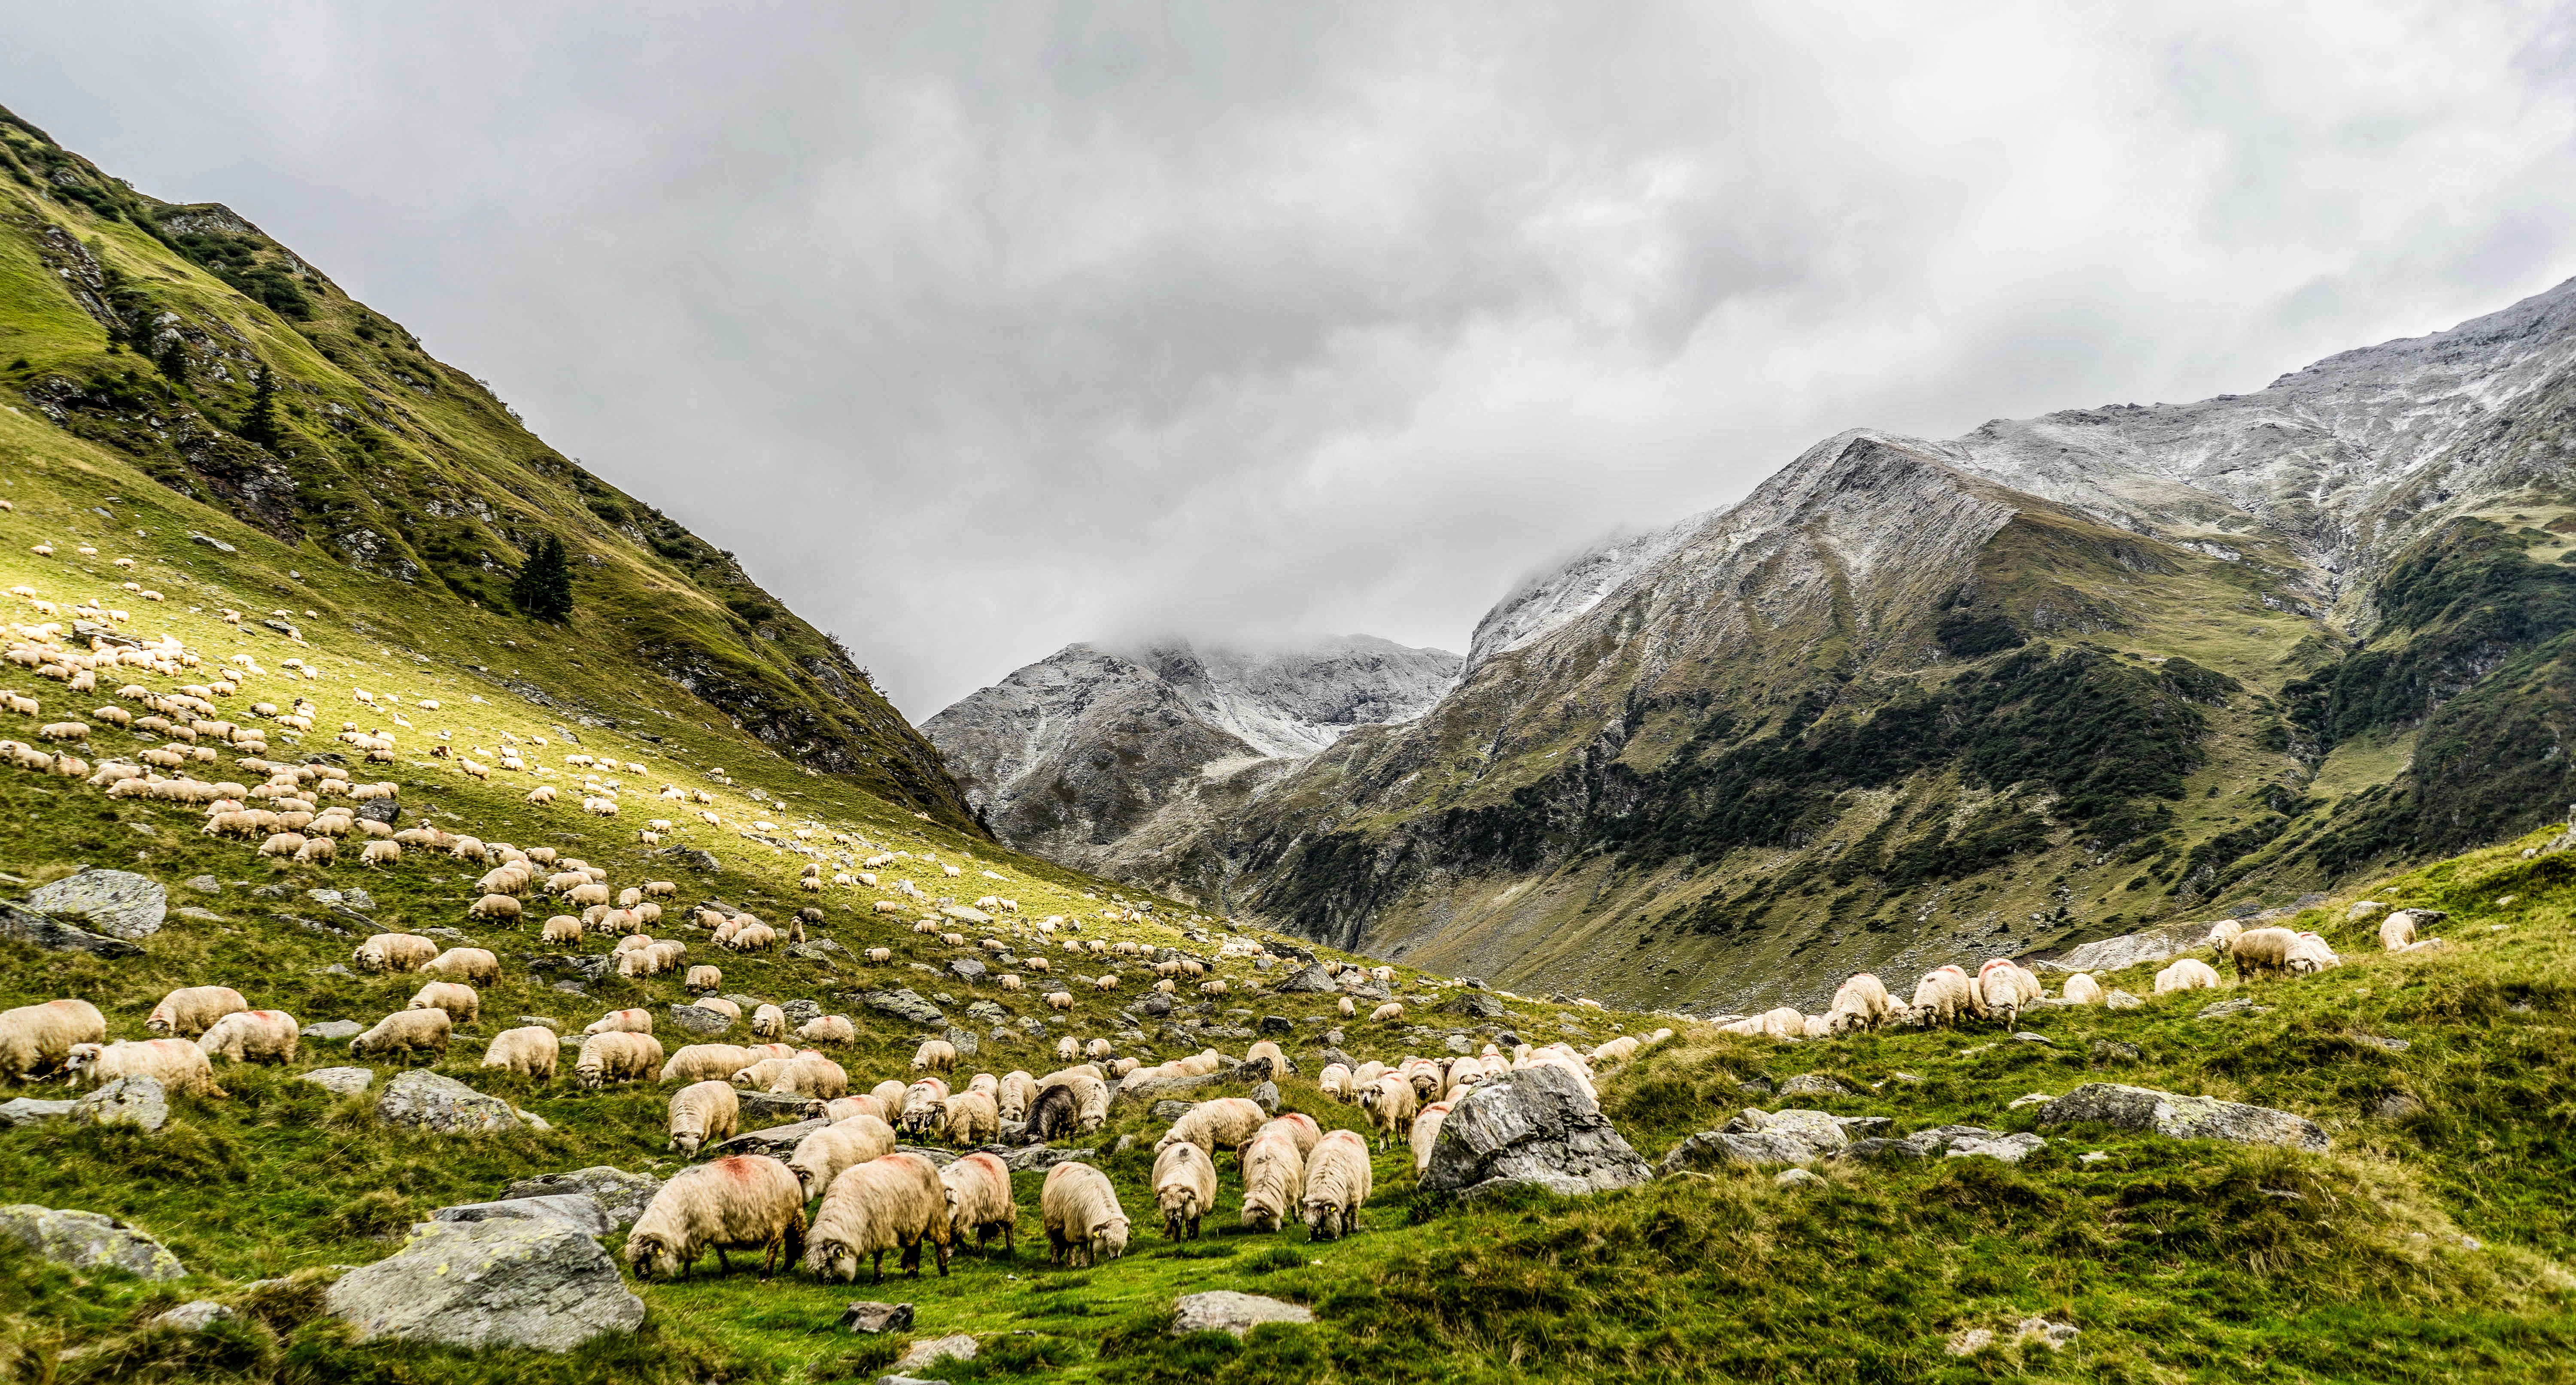 Herd and Pasture with Sheep and mountains landscape image - Free ...